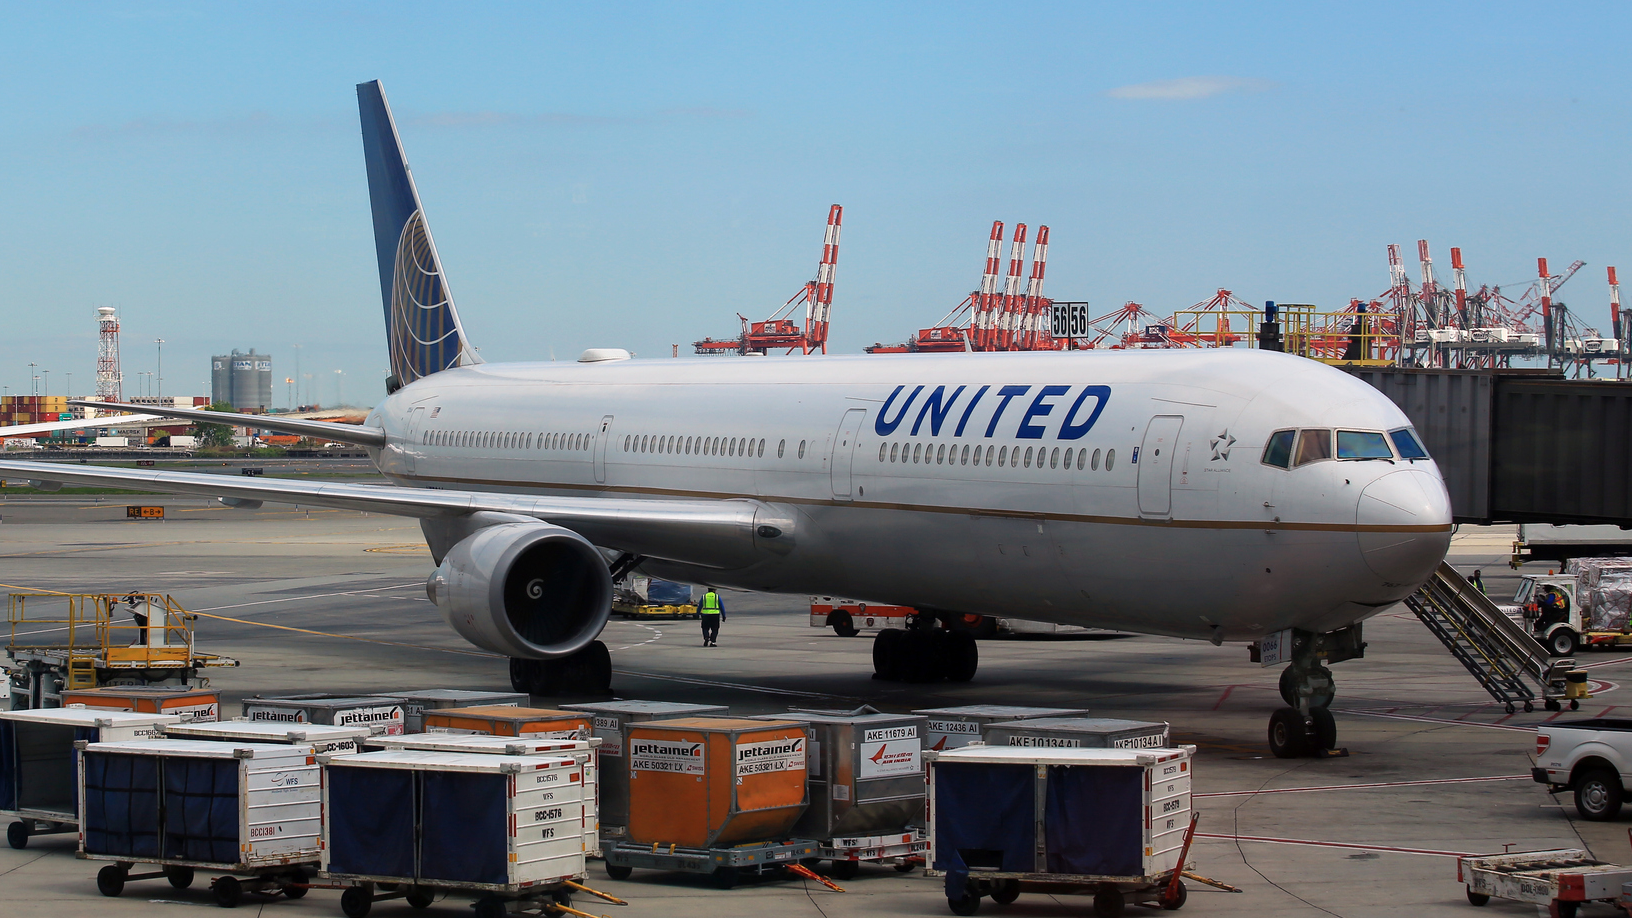 United Airlines passengers remember ‘scary’ Boeing 777 engine explosion